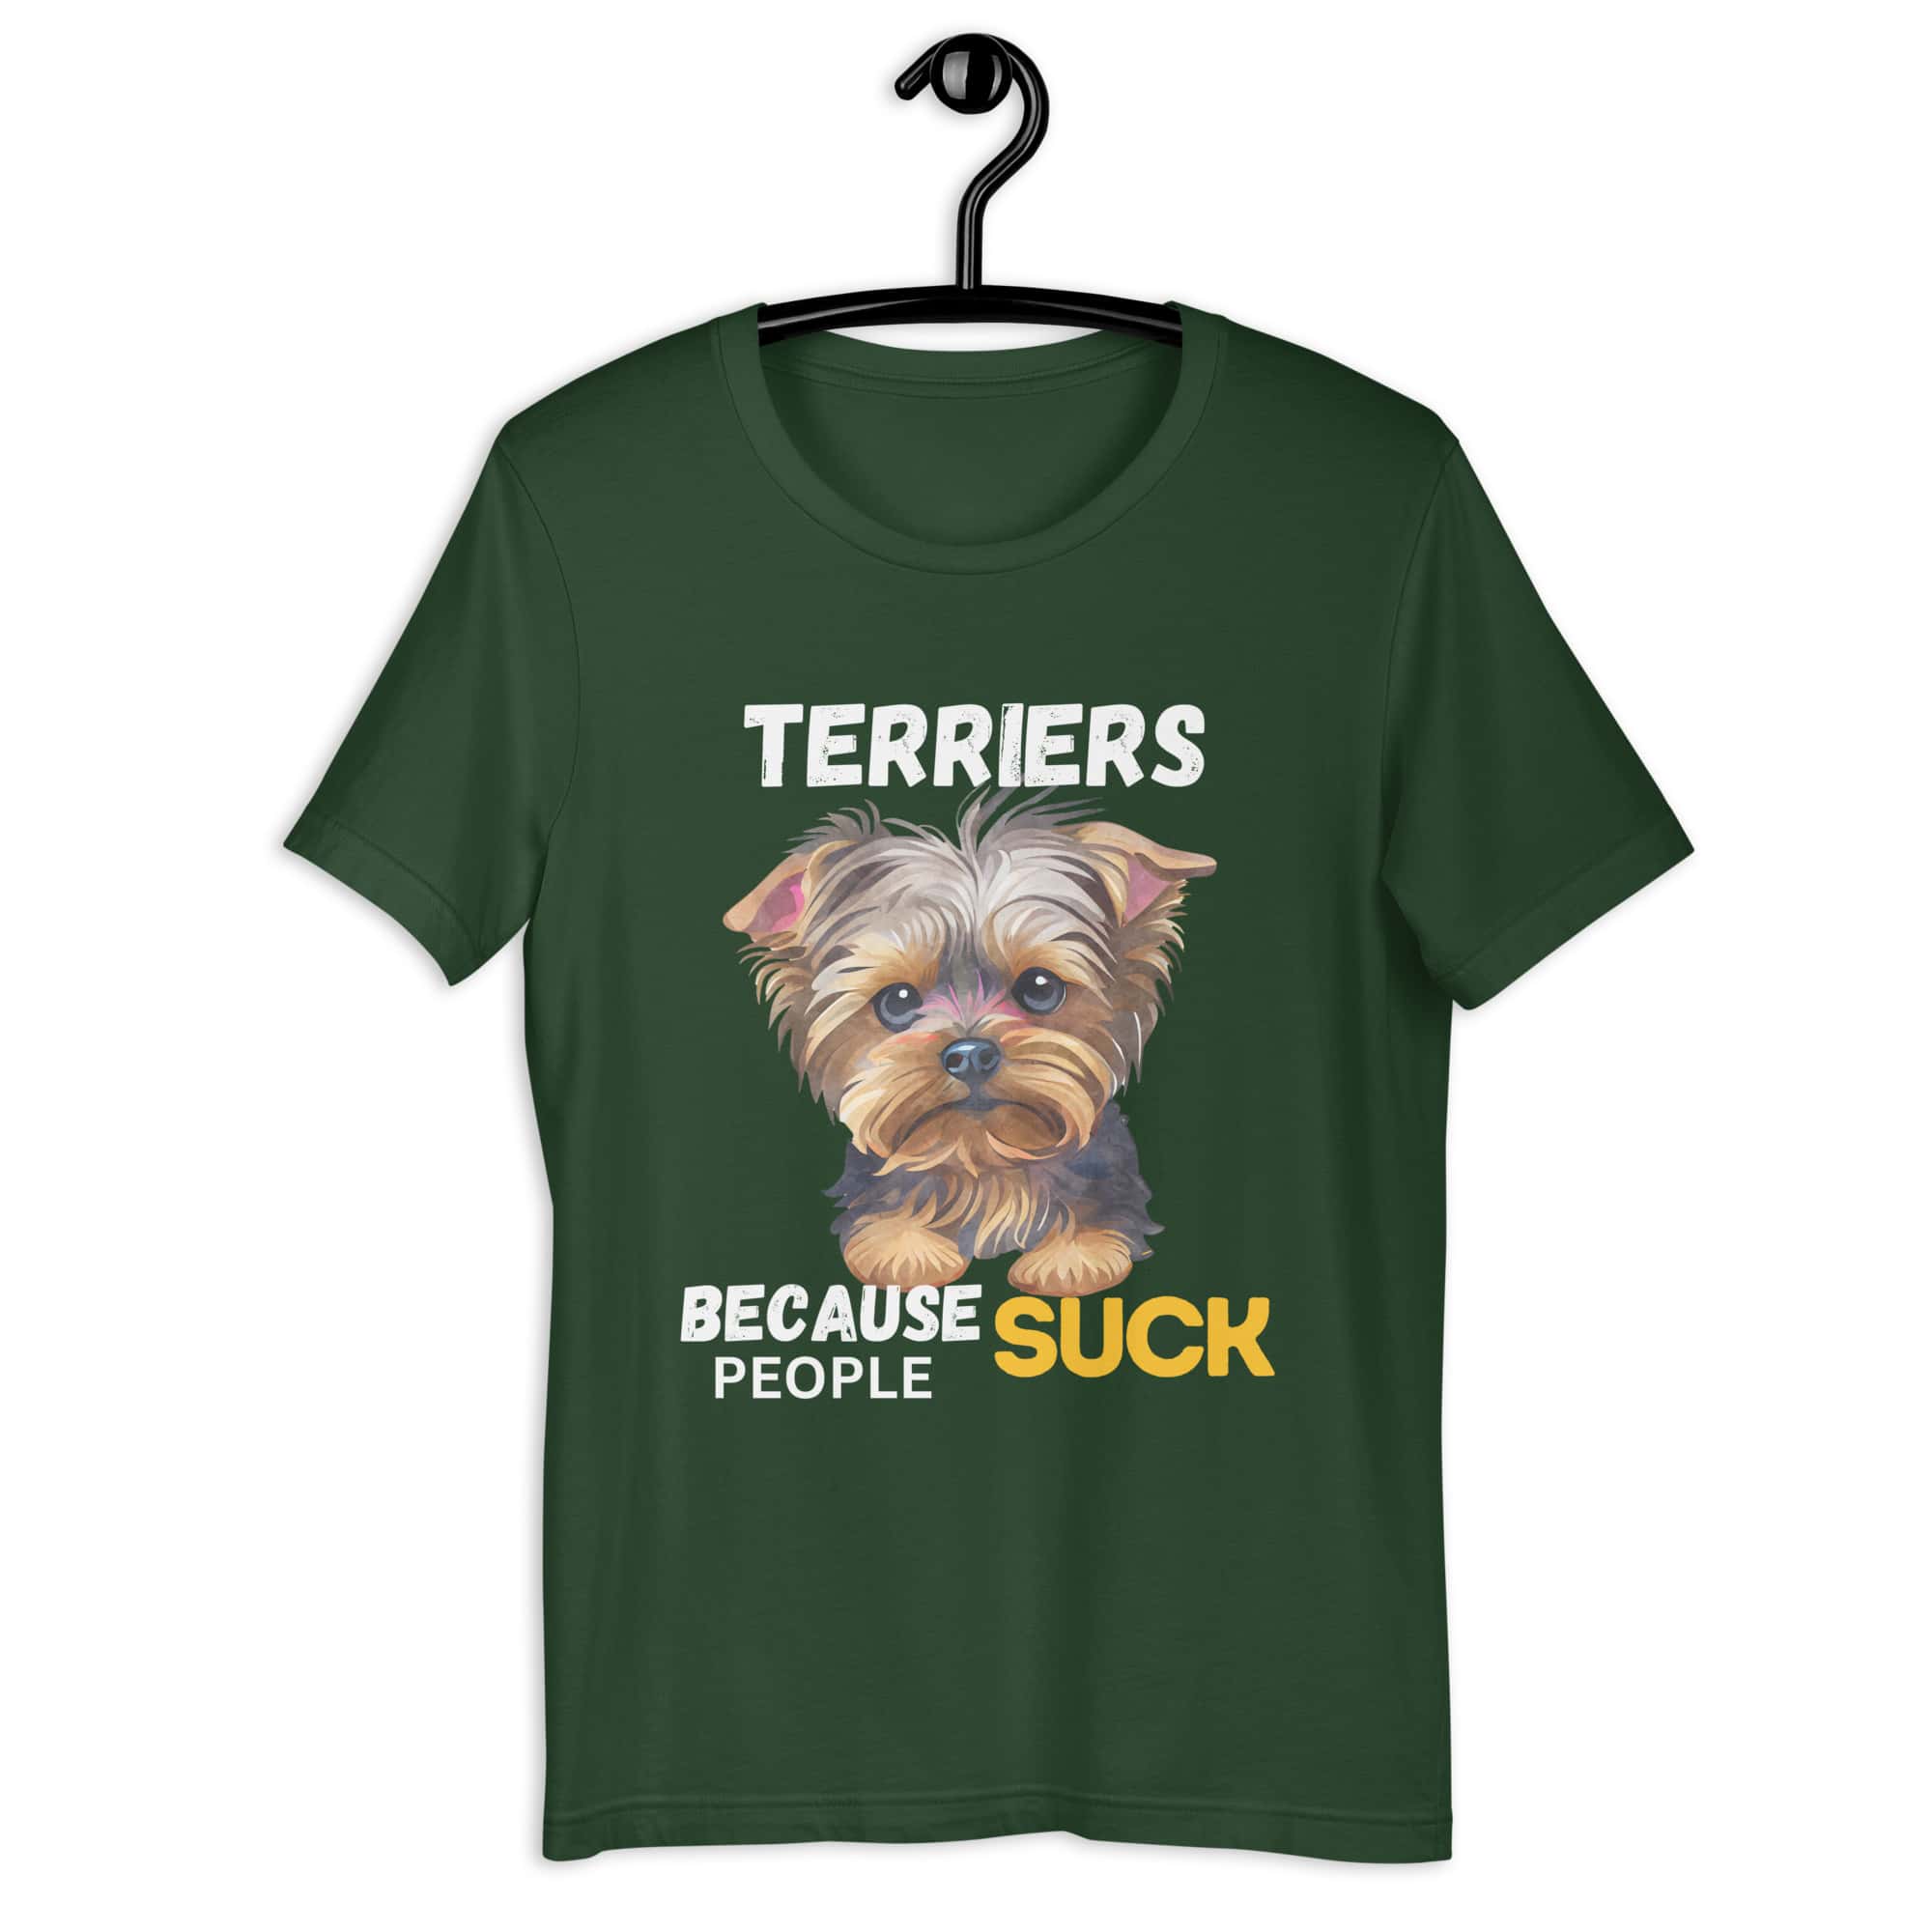 Terriers Because People Suck Unisex T-Shirt green